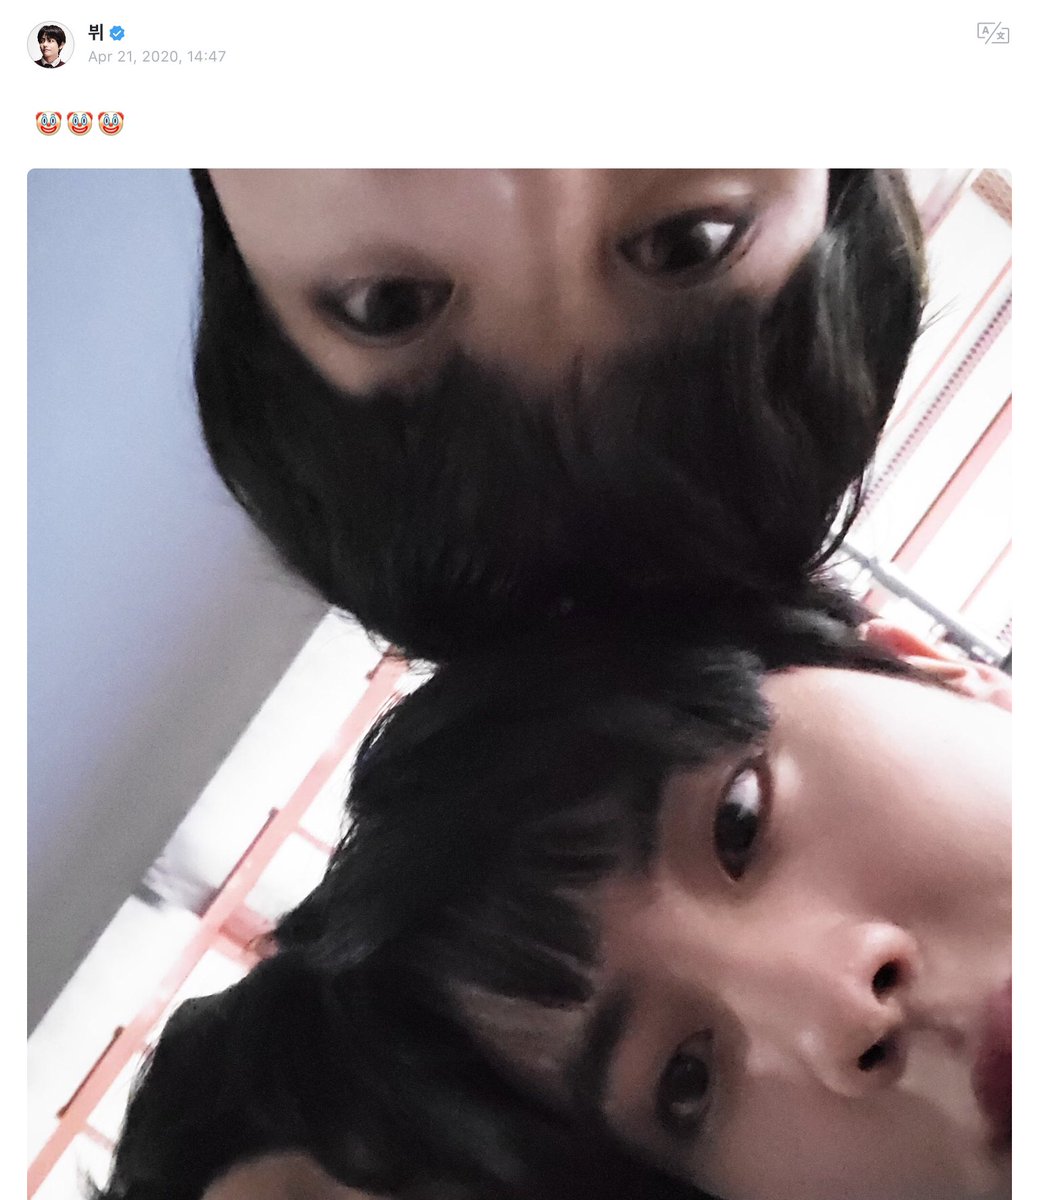 21 April 2020 (Weverse by Taehyung)